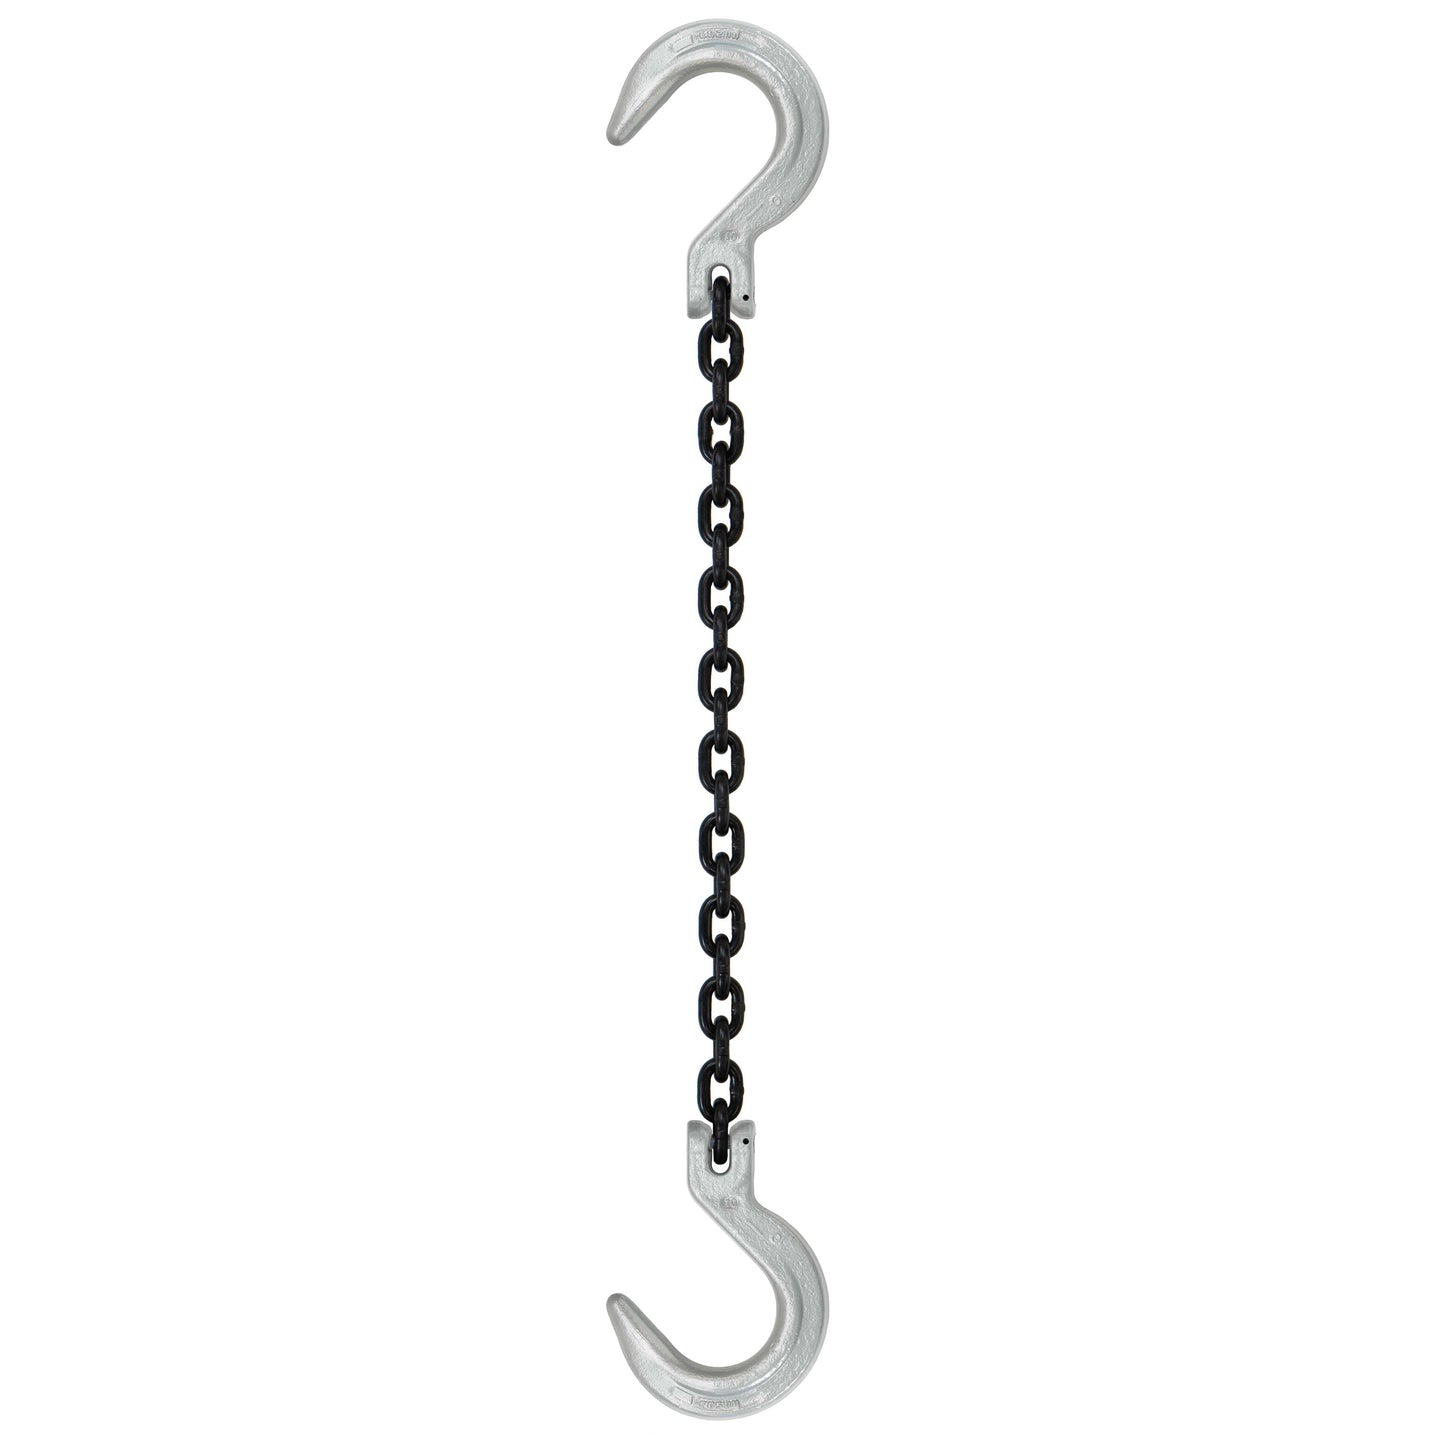 38 inch x 14 foot Domestic Single Leg Chain Sling w Crosby Foundry & Foundry Hooks Grade 100 image 1 of 2